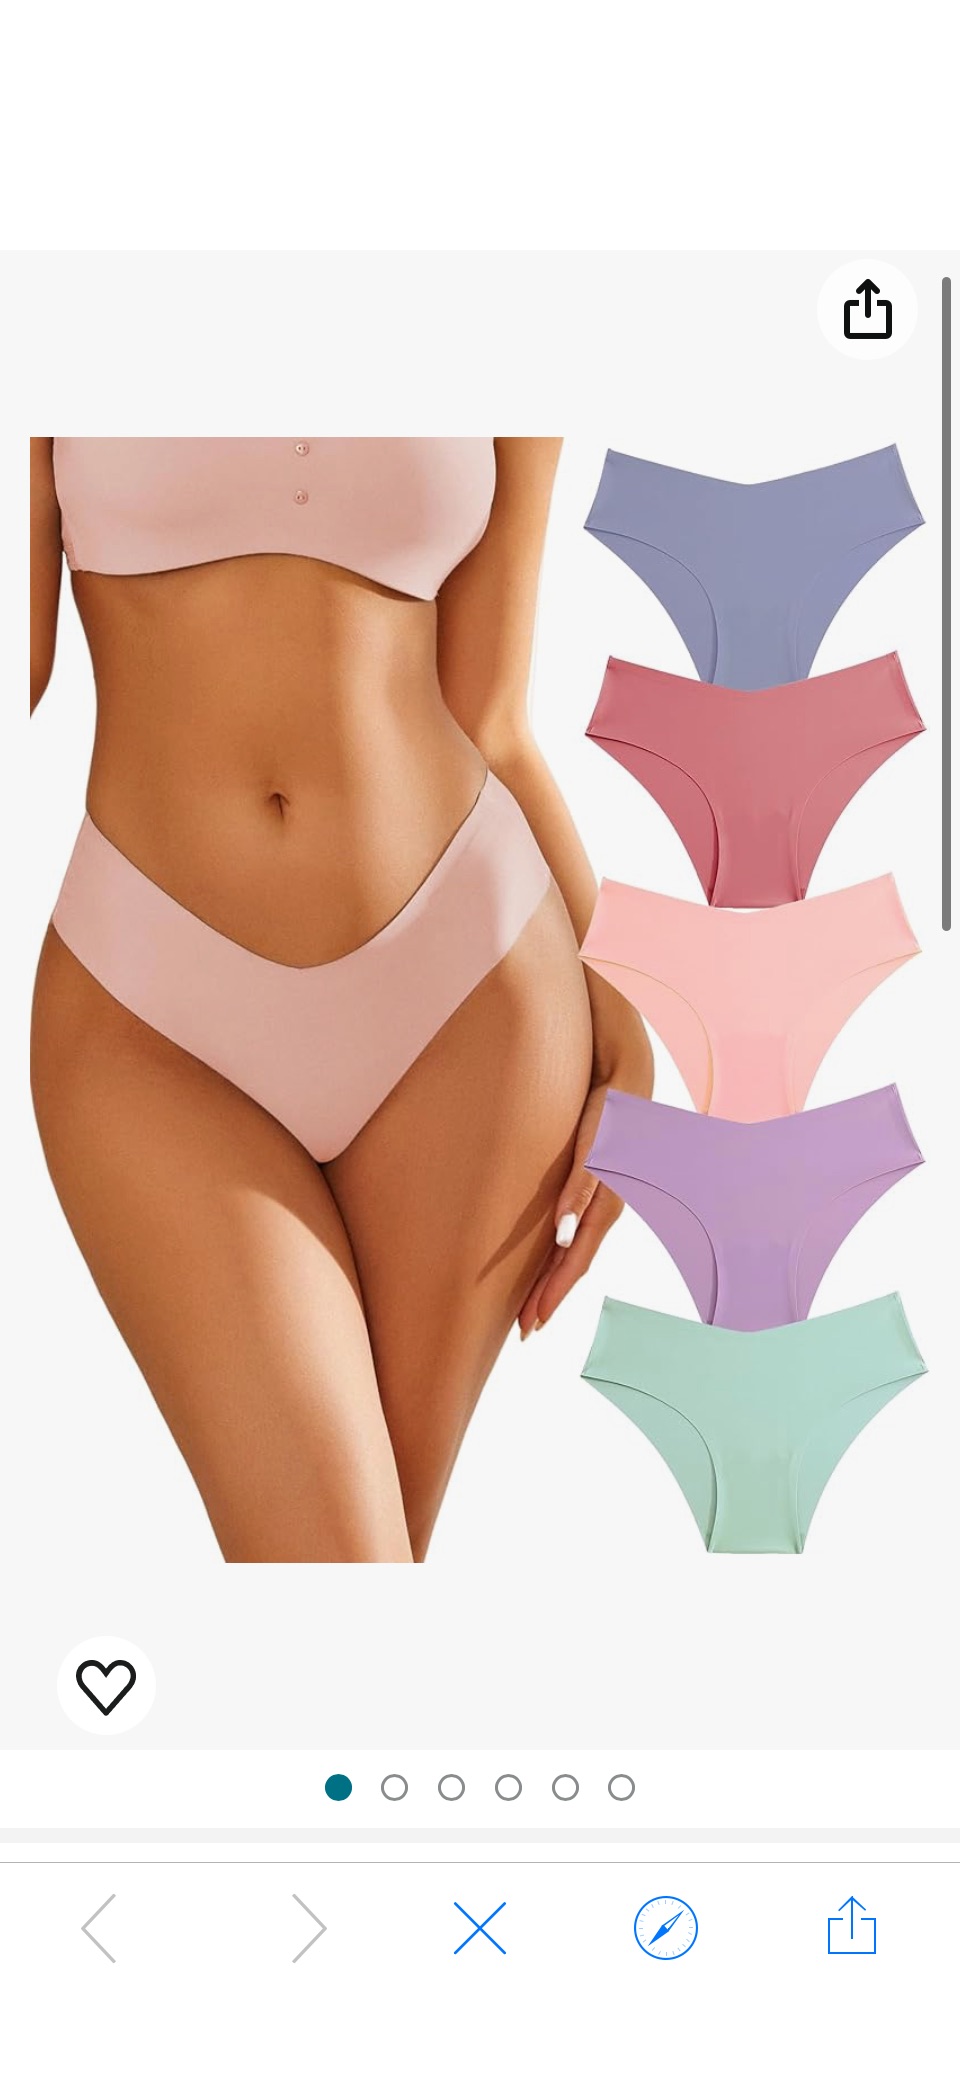 Amazon.com: FINETOO Women’s Seamless Underwear Soft Stretch Briefs Invisibles Hipster V Cut cheeky No Show Bikini Panties 5 pack XS-L (M) : Clothing, Shoes & Jewelry